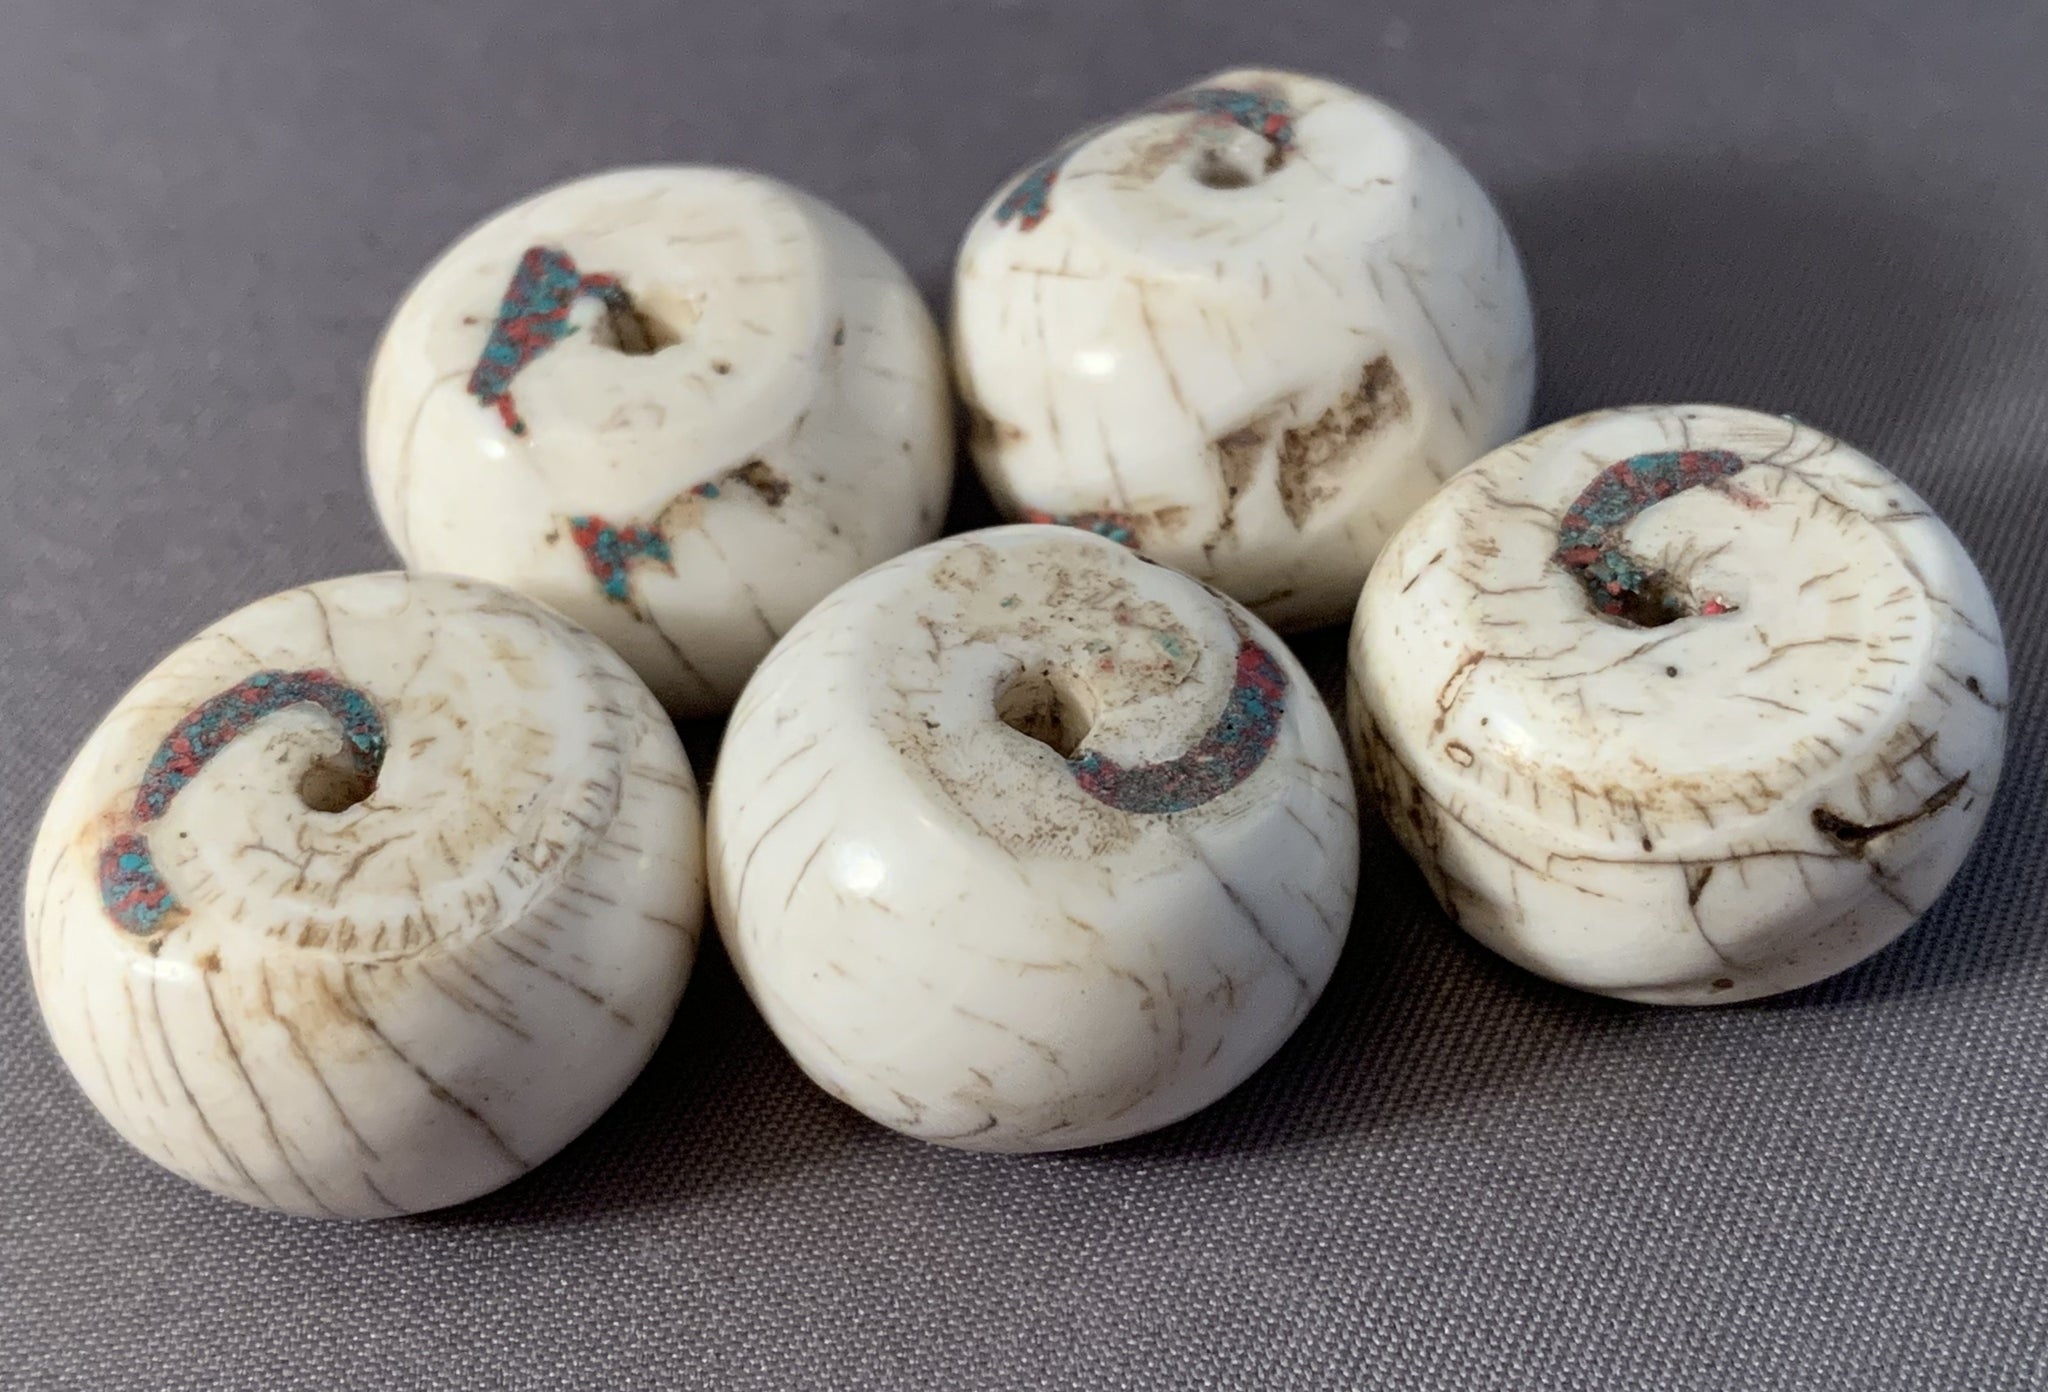 12 Conch Shell Beads from Nepal/Tibet